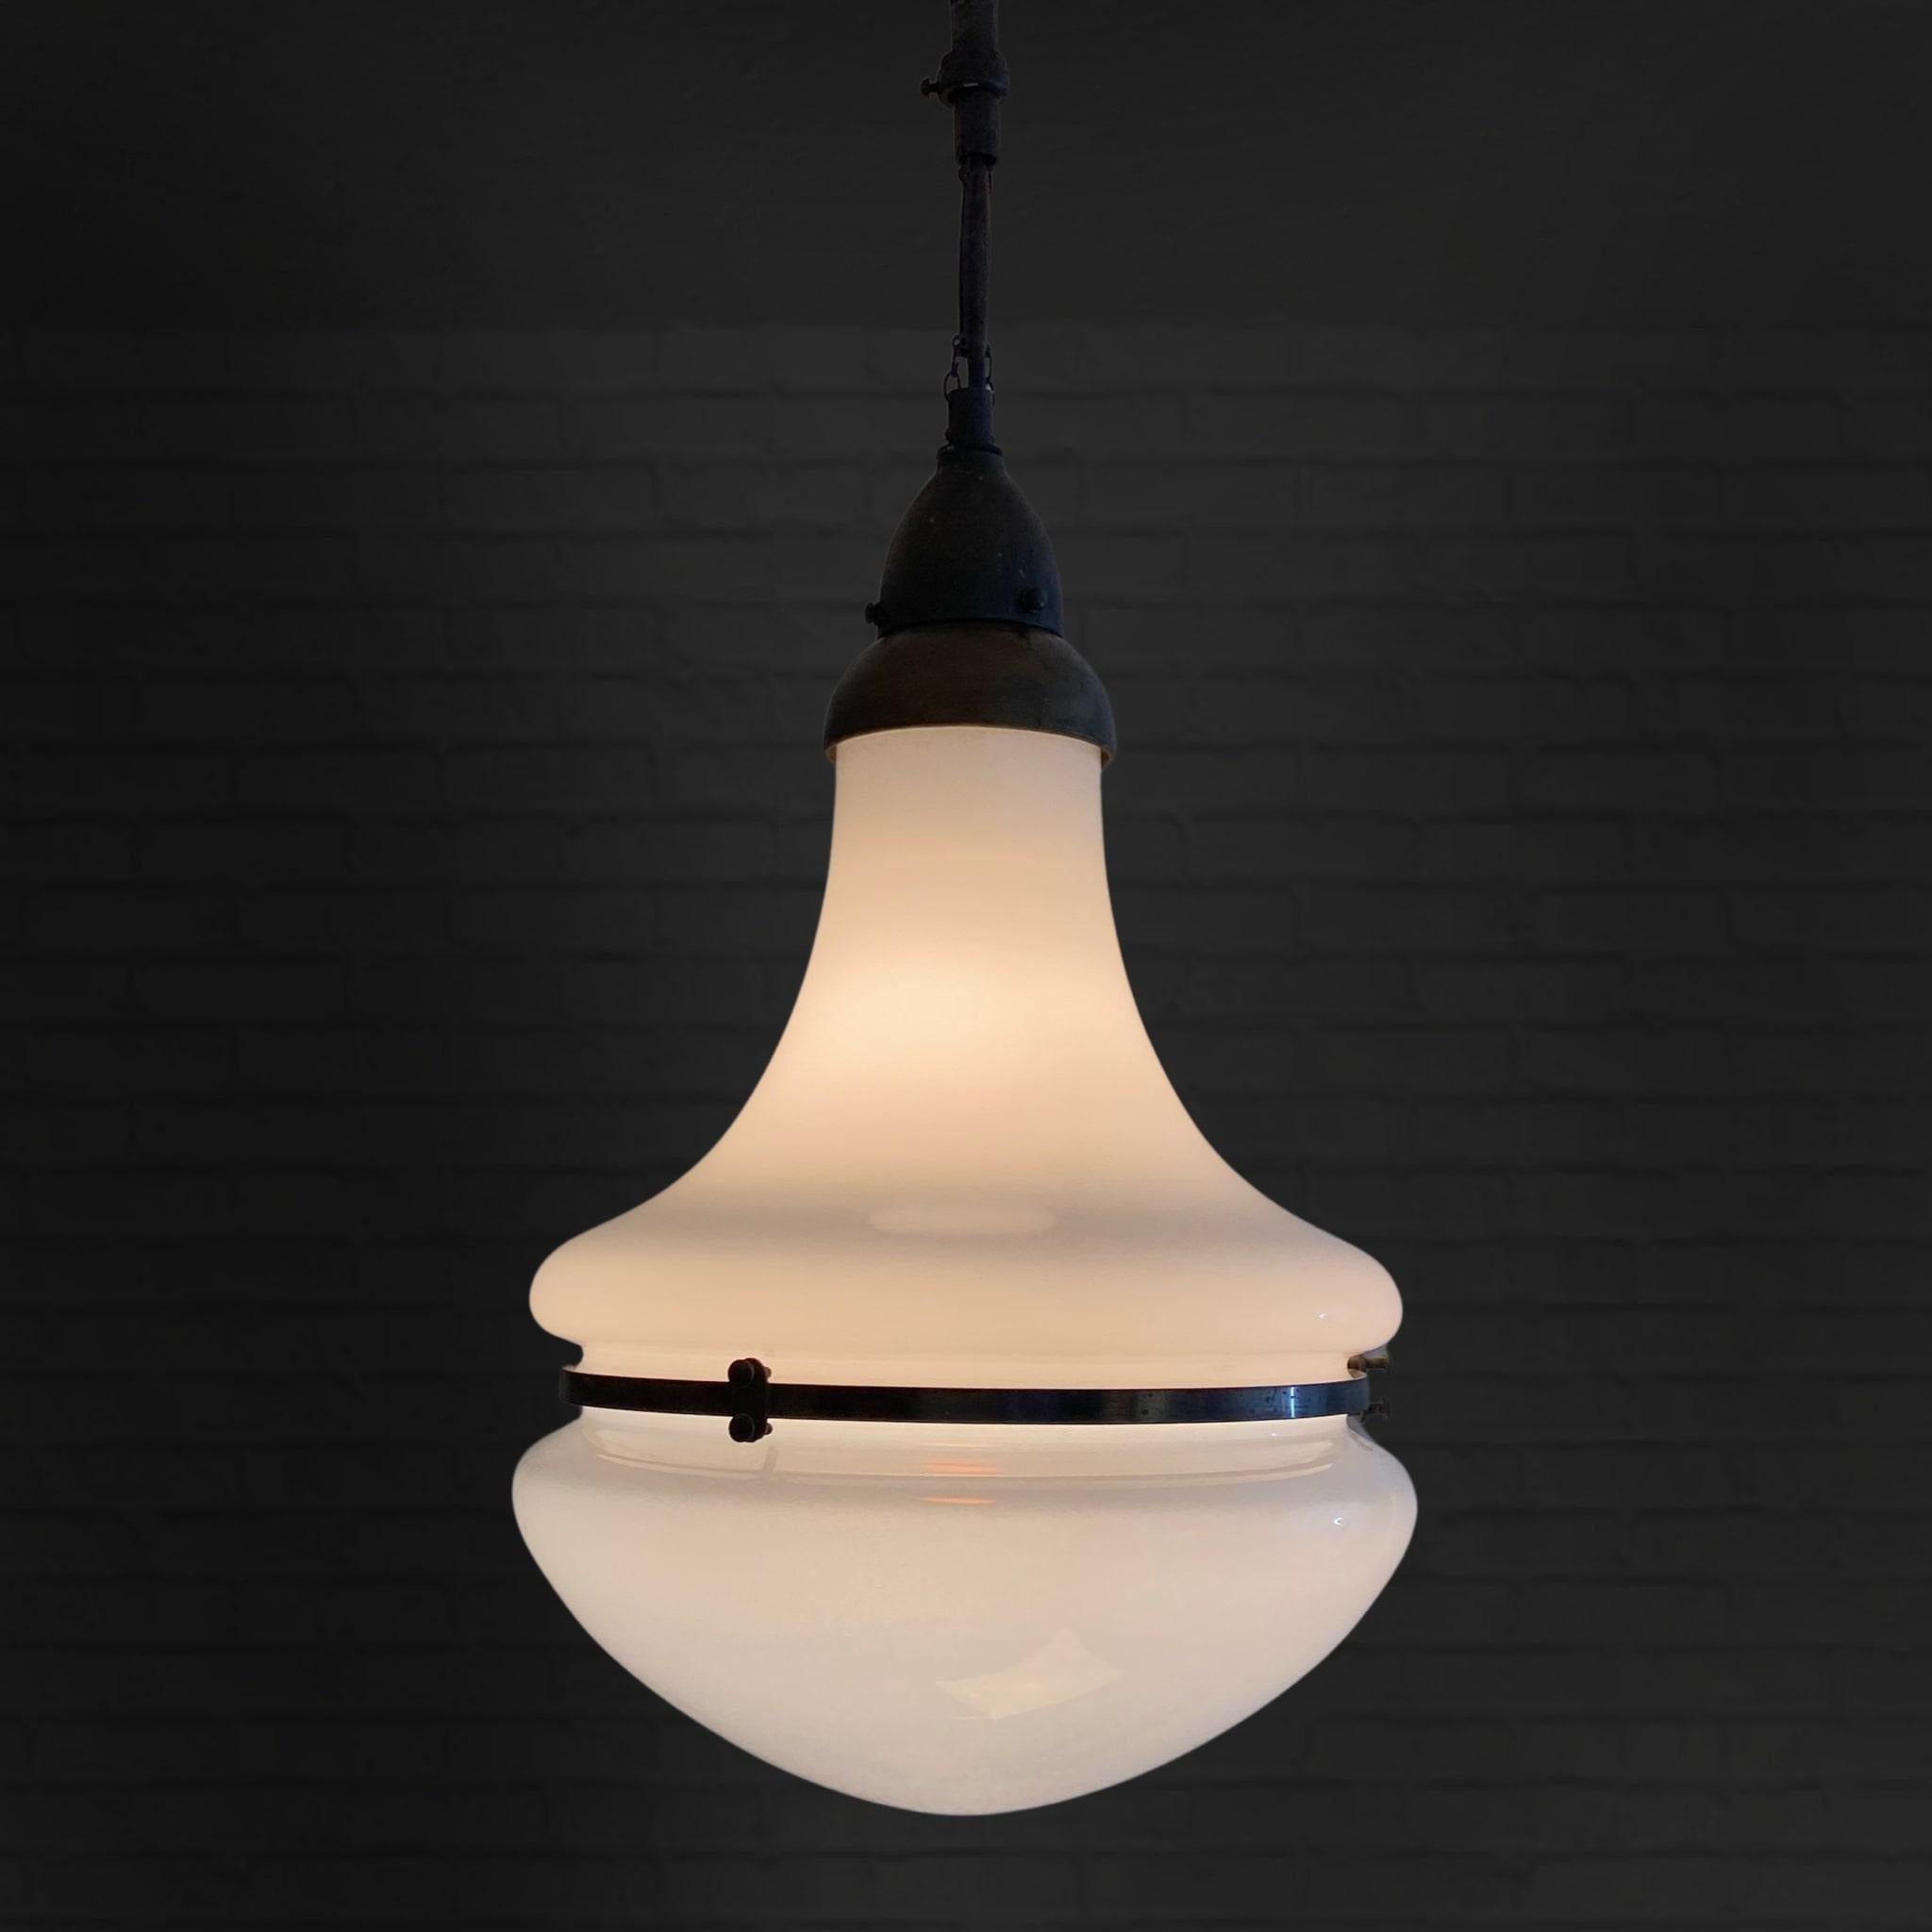 Large Luzette pendant lamp, often attributed to the German architect Peter Behrens. The model was originally developed for Siemens-Schuckert around 1920, but this example was probably produced by ASEA in Sweden in the late 1920s. Constructed from